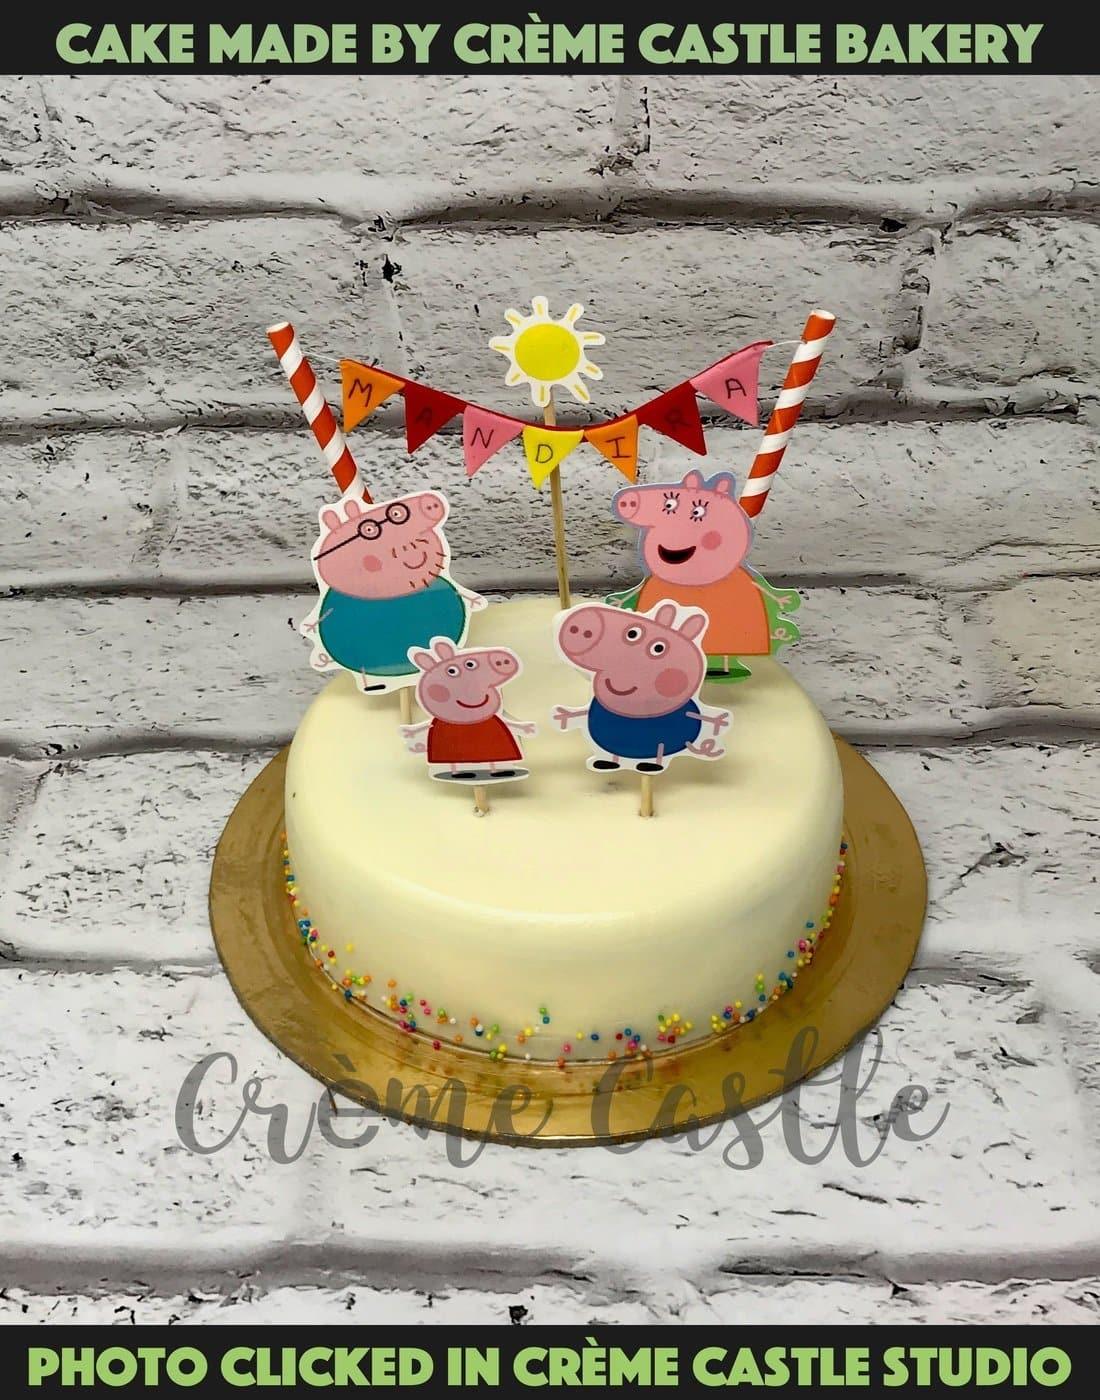 peppa pig birthday cake design ideas decorating tutorial video at home  fondant classes courses  YouTube